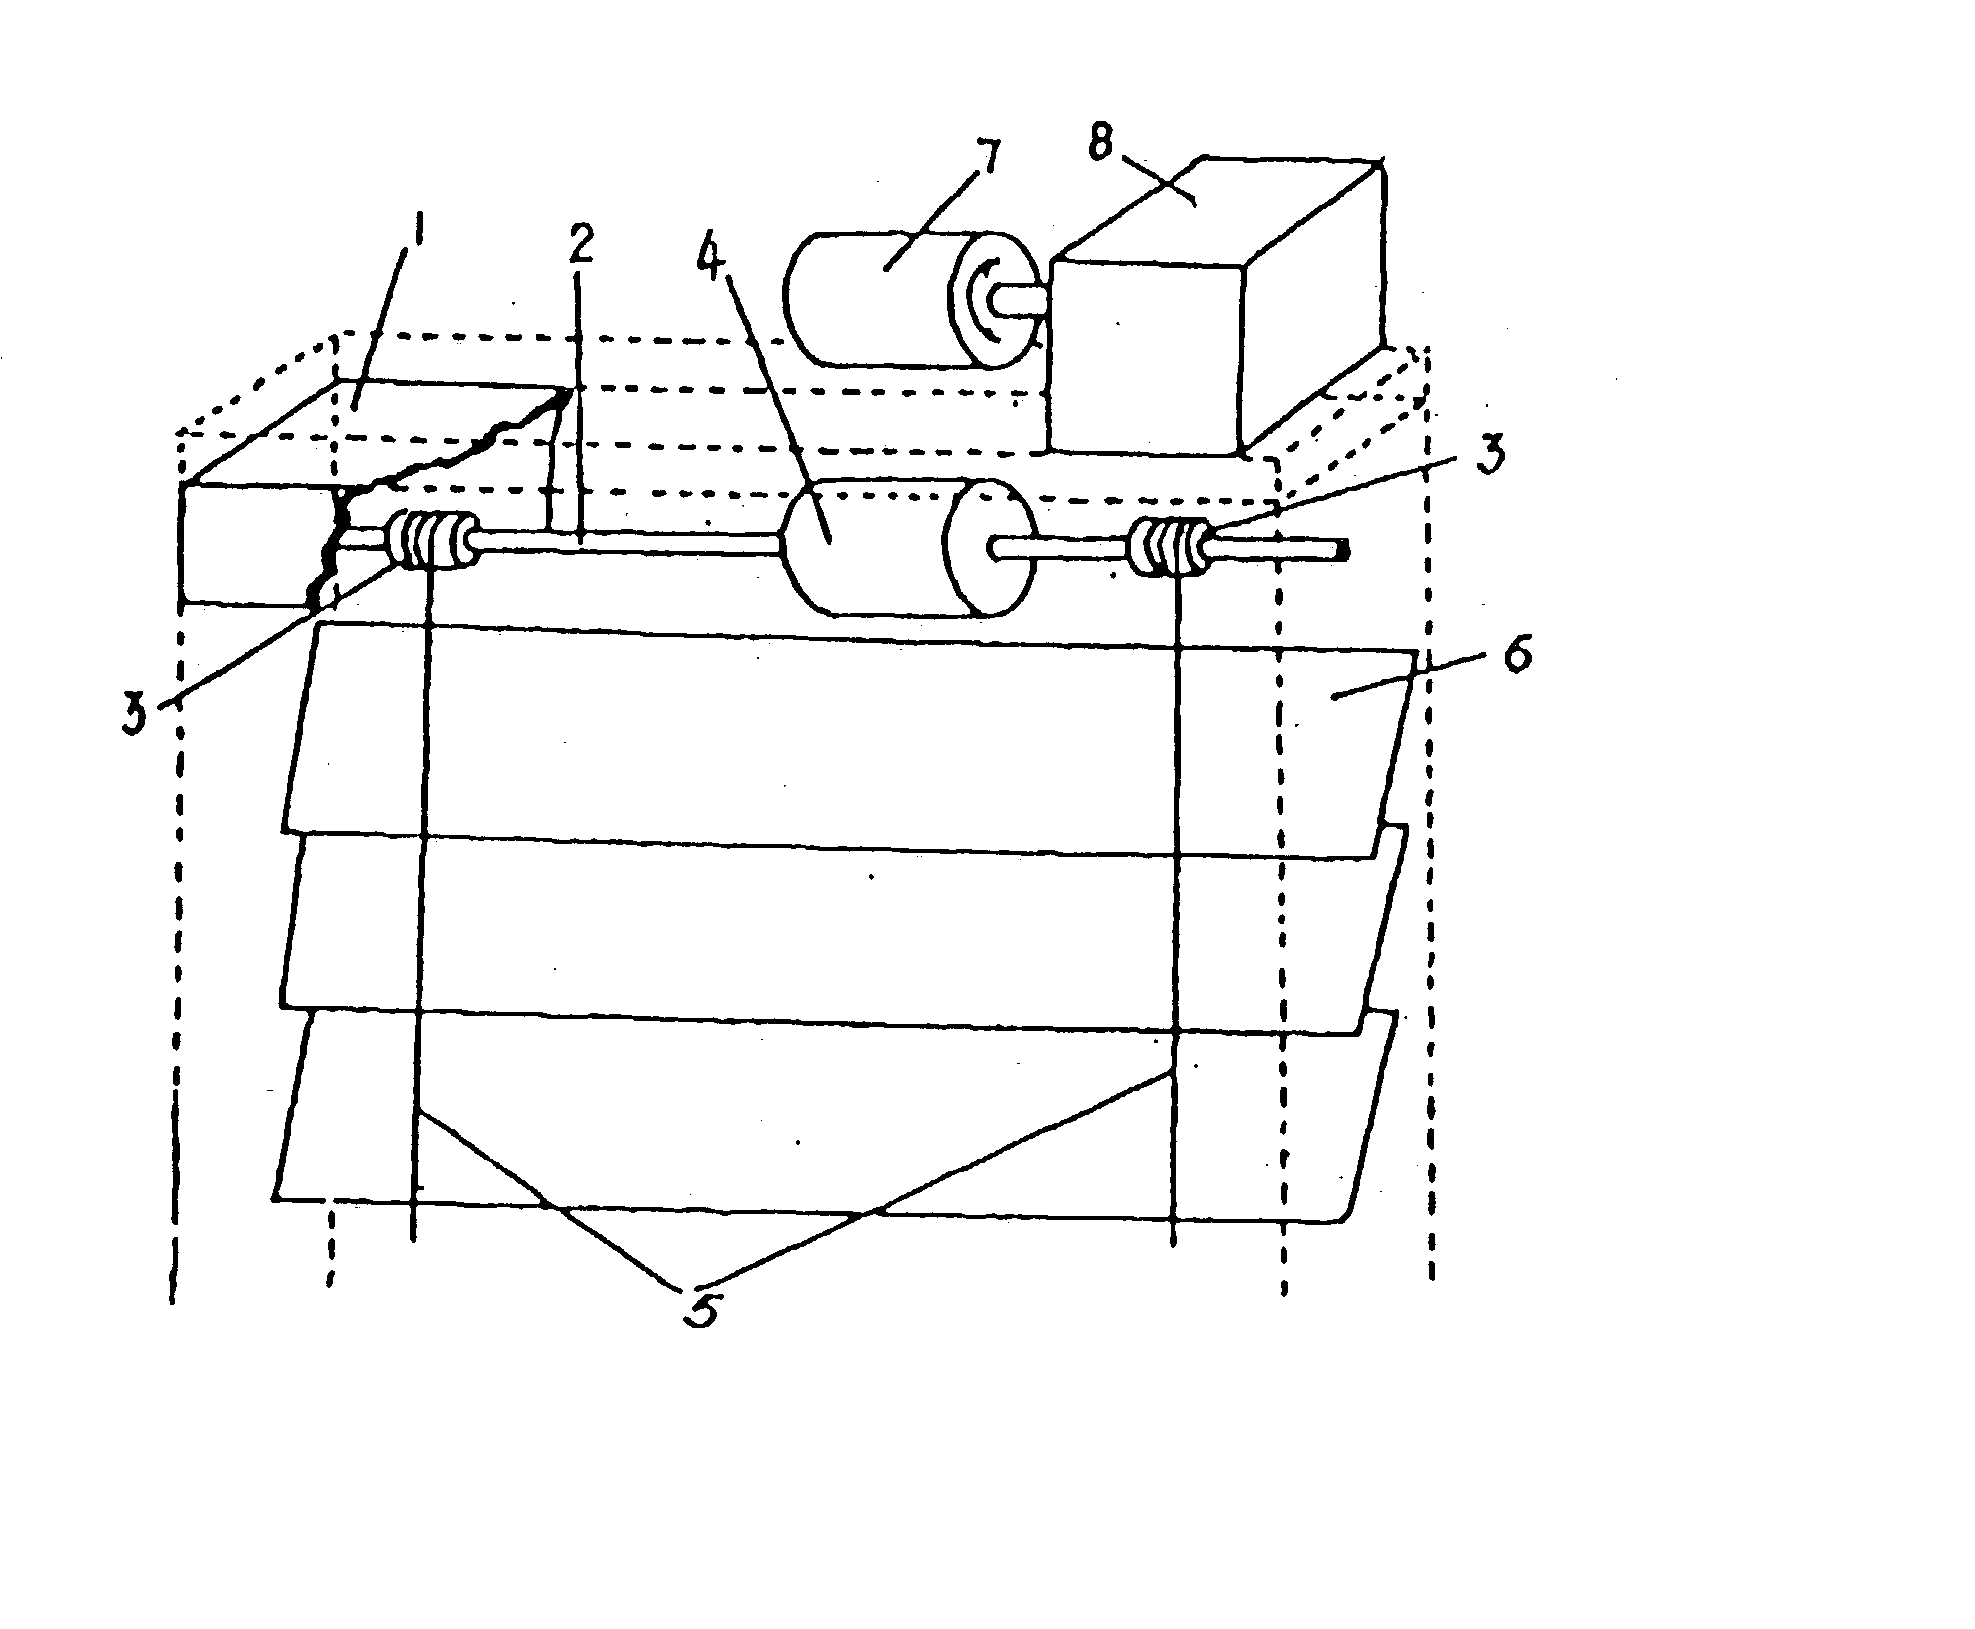 Method of manufacturing the magnetic operation system used in a venetian blind or the like placed inside an insulating glass frame